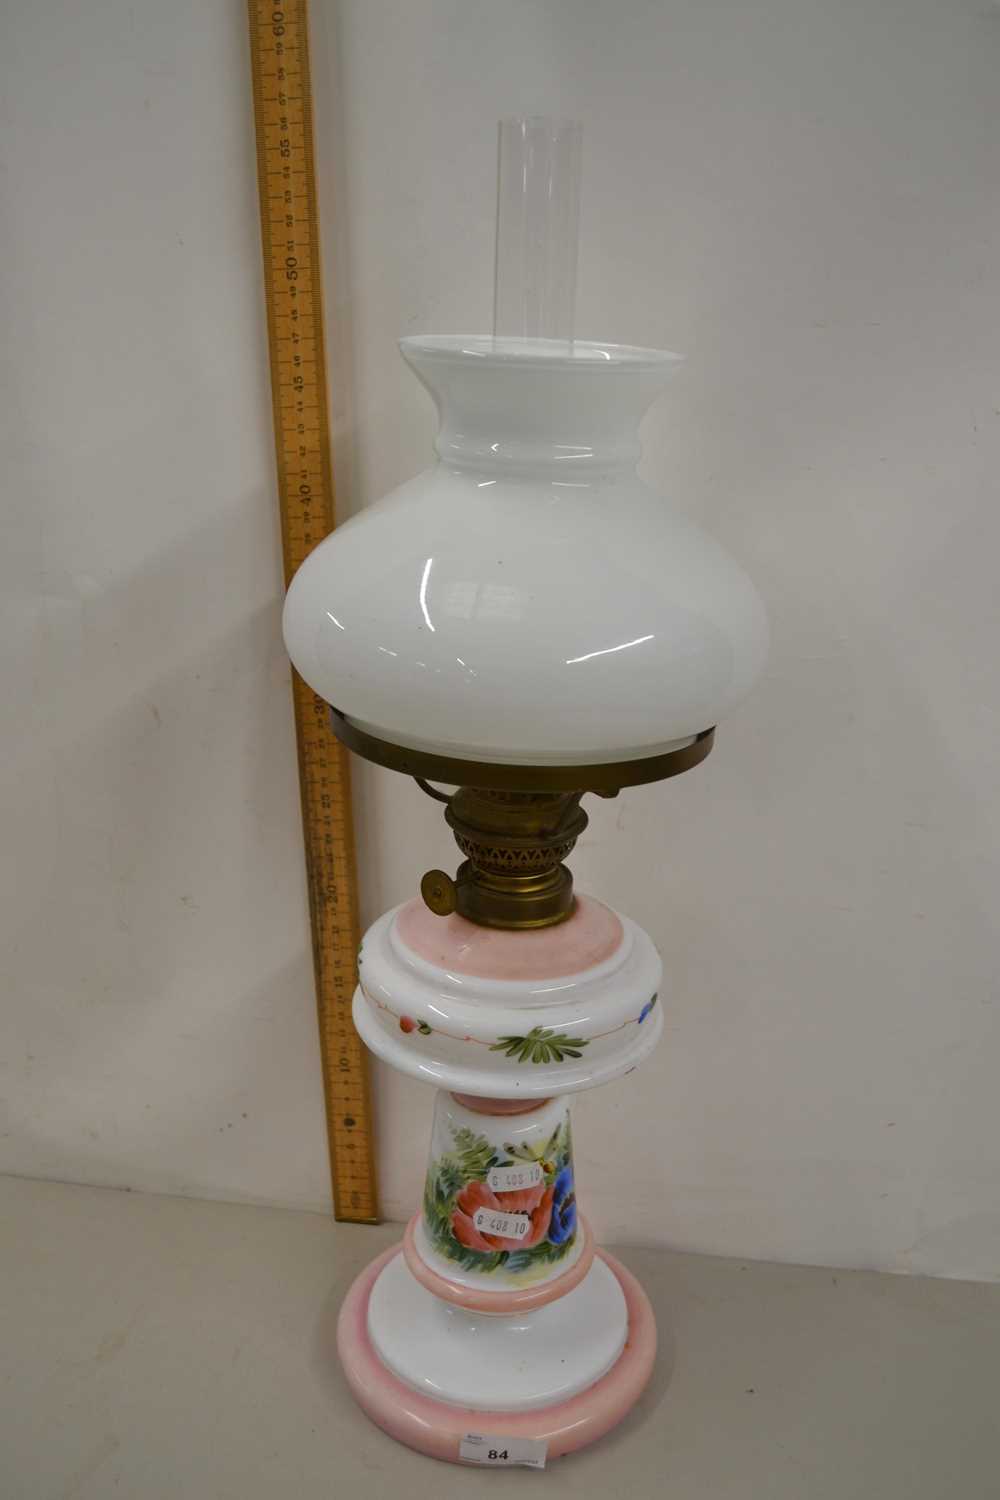 Oil lamp with a milk glass body with painted floral decoration